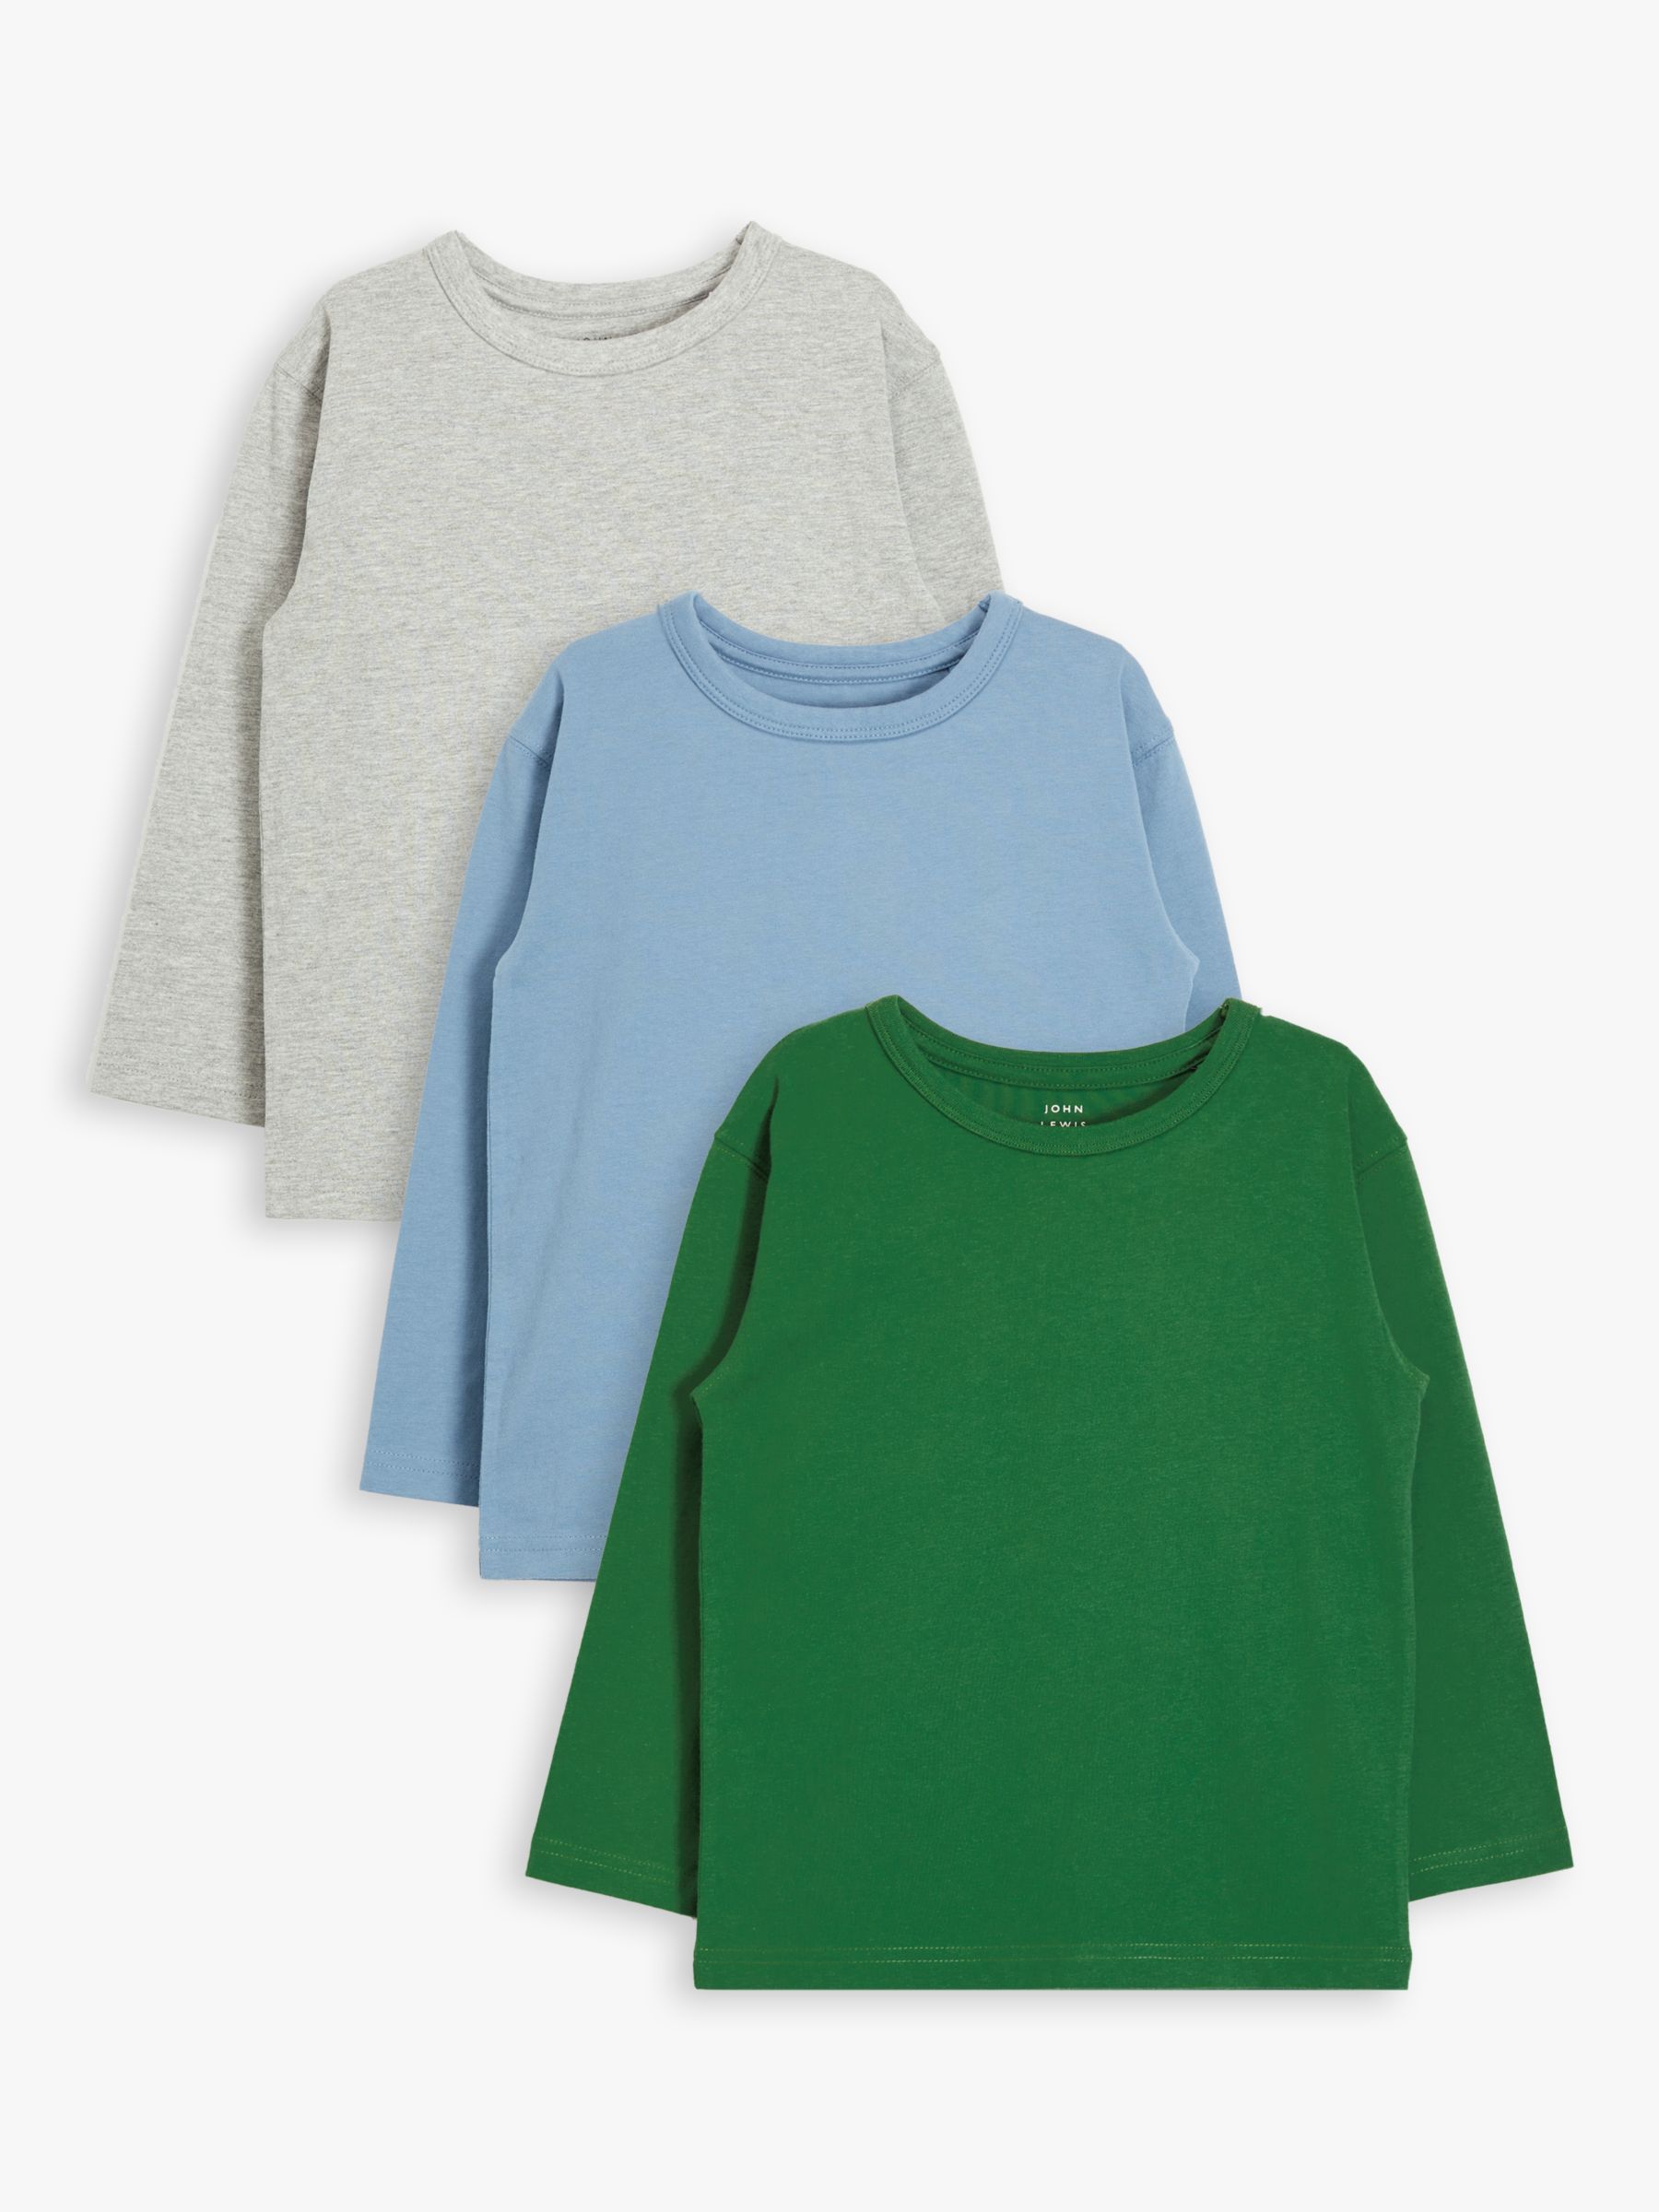 Image of John Lewis and Partners Boys Long Sleeve TShirts Pack of 3 GreenMulti